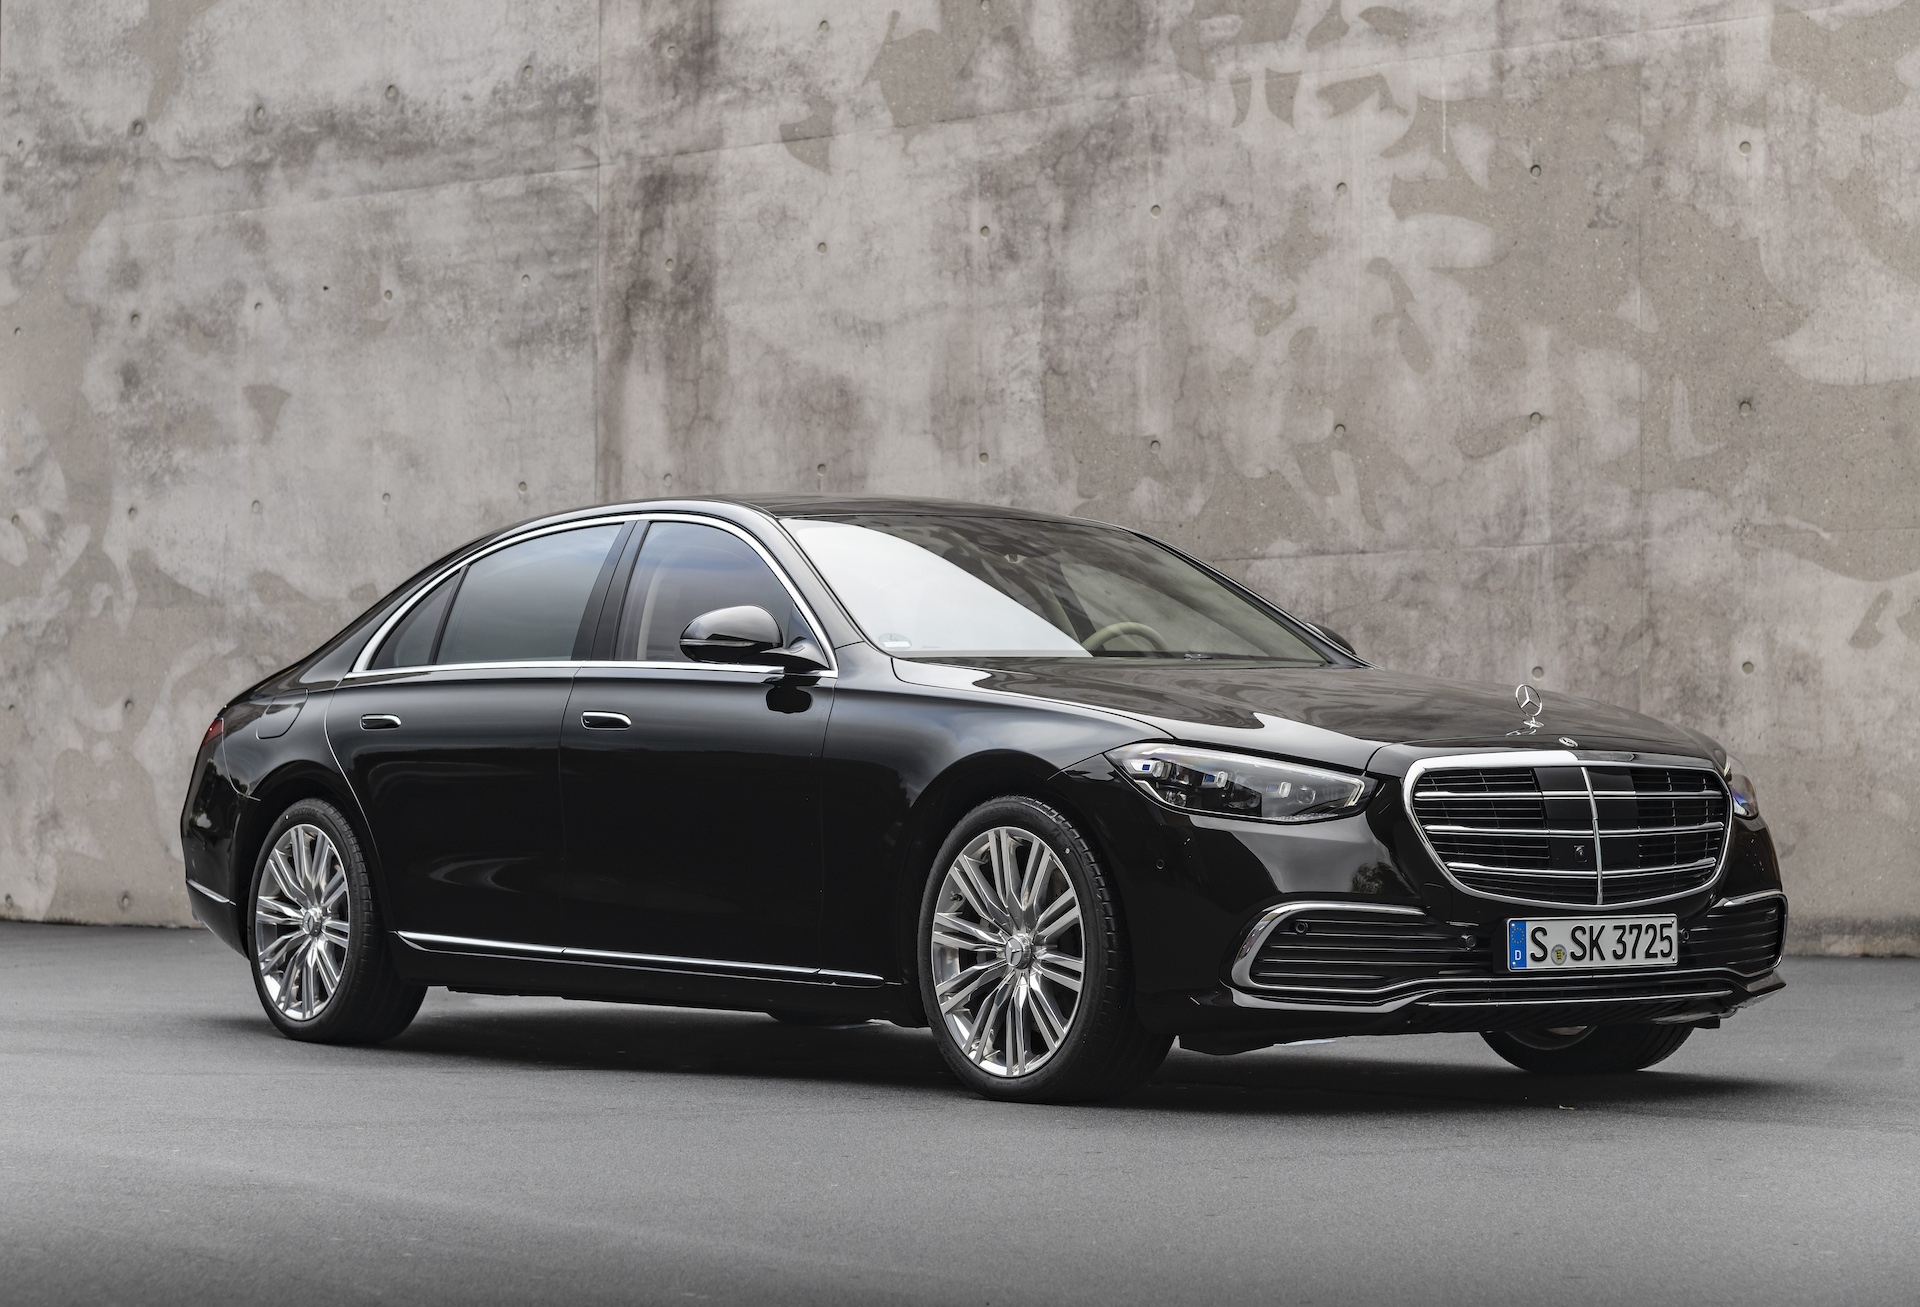 Mercedes-Benz S-Class 2021 is currently available from $223,700 